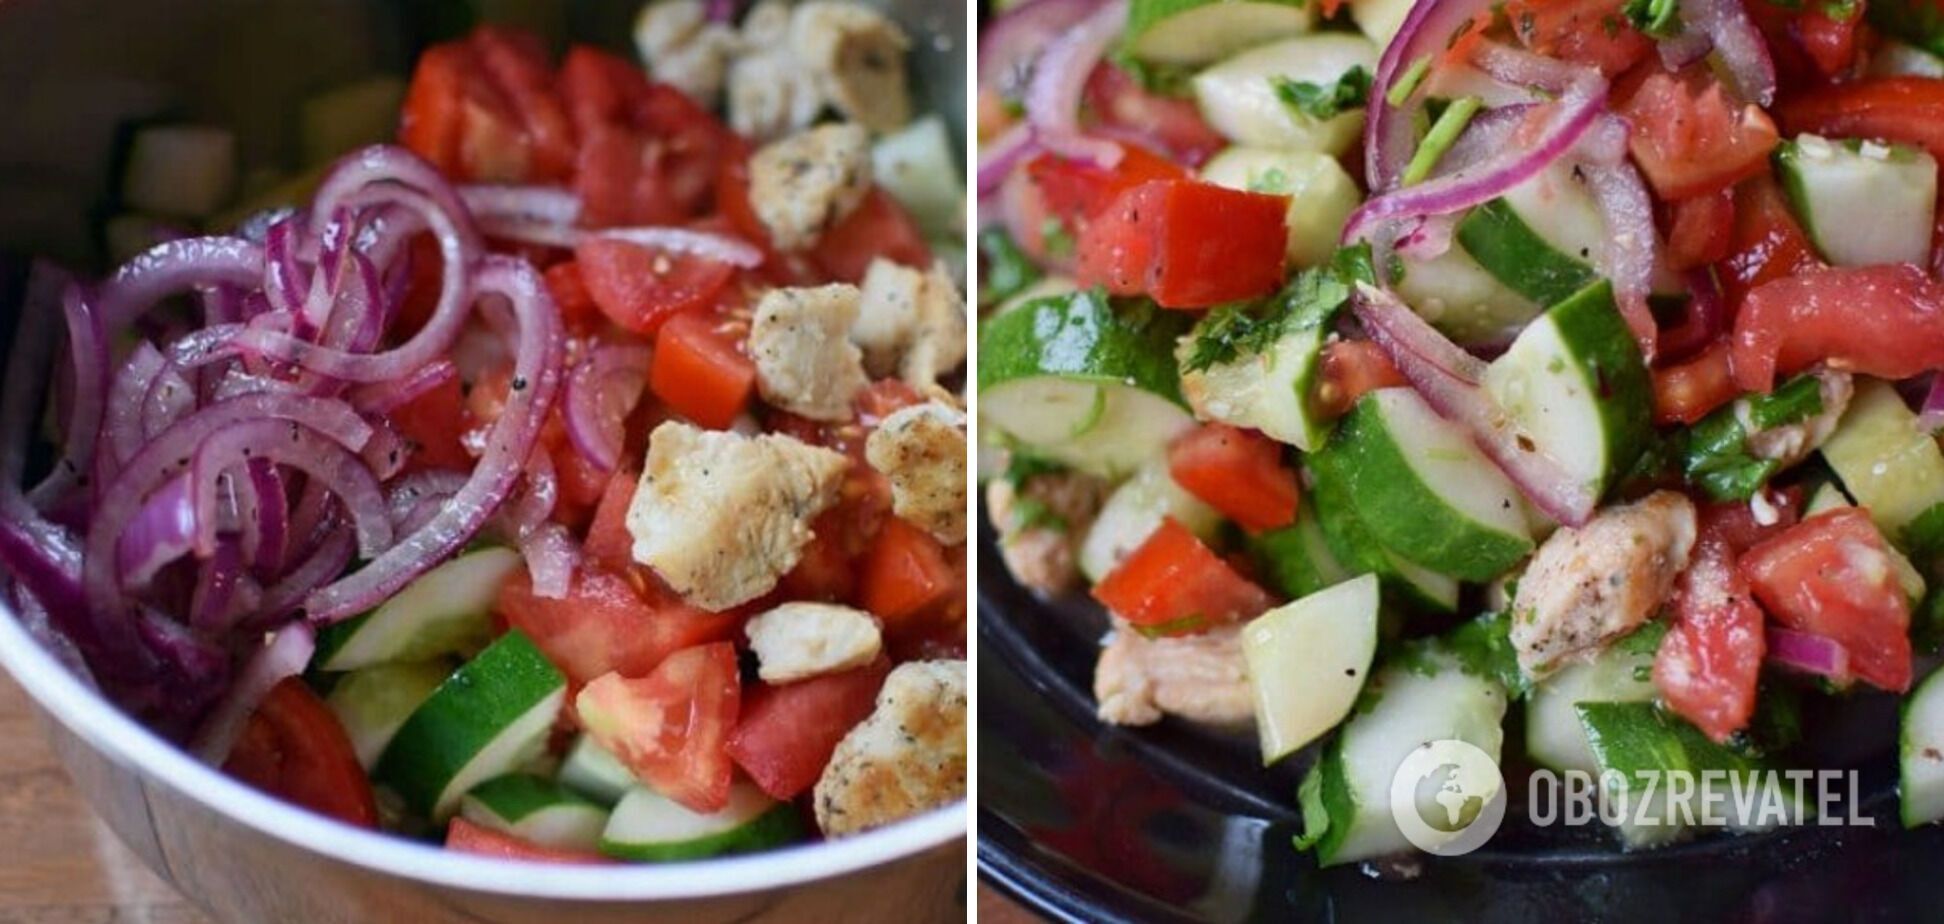 Salad with pickled onions, vegetables and chicken